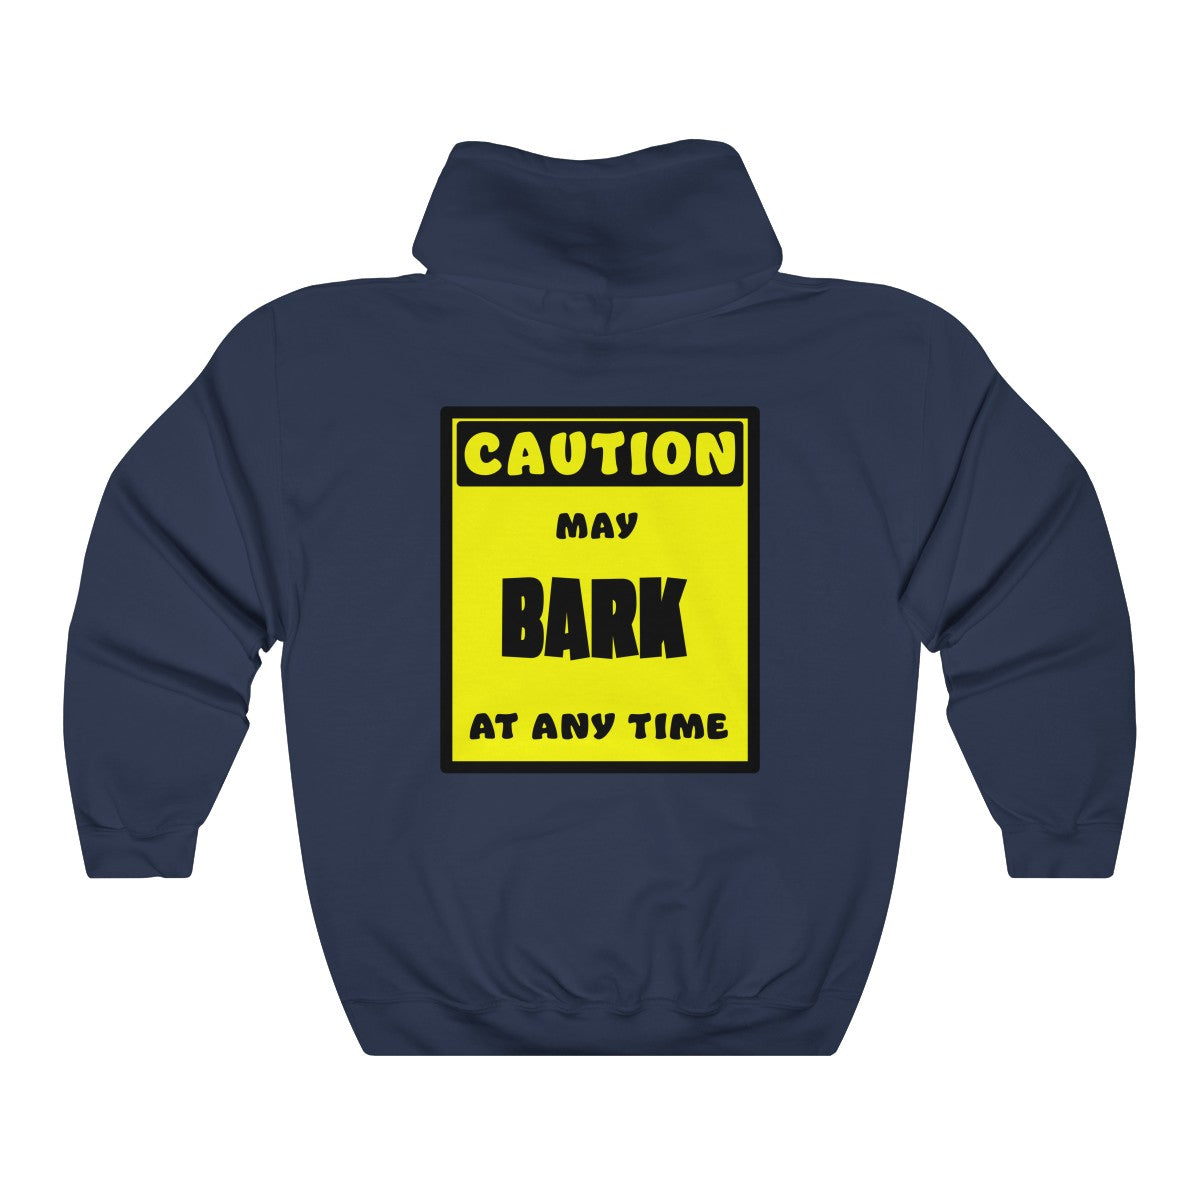 CAUTION! May BARK at any time! - Hoodie Hoodie AFLT-Whootorca Navy Blue S 